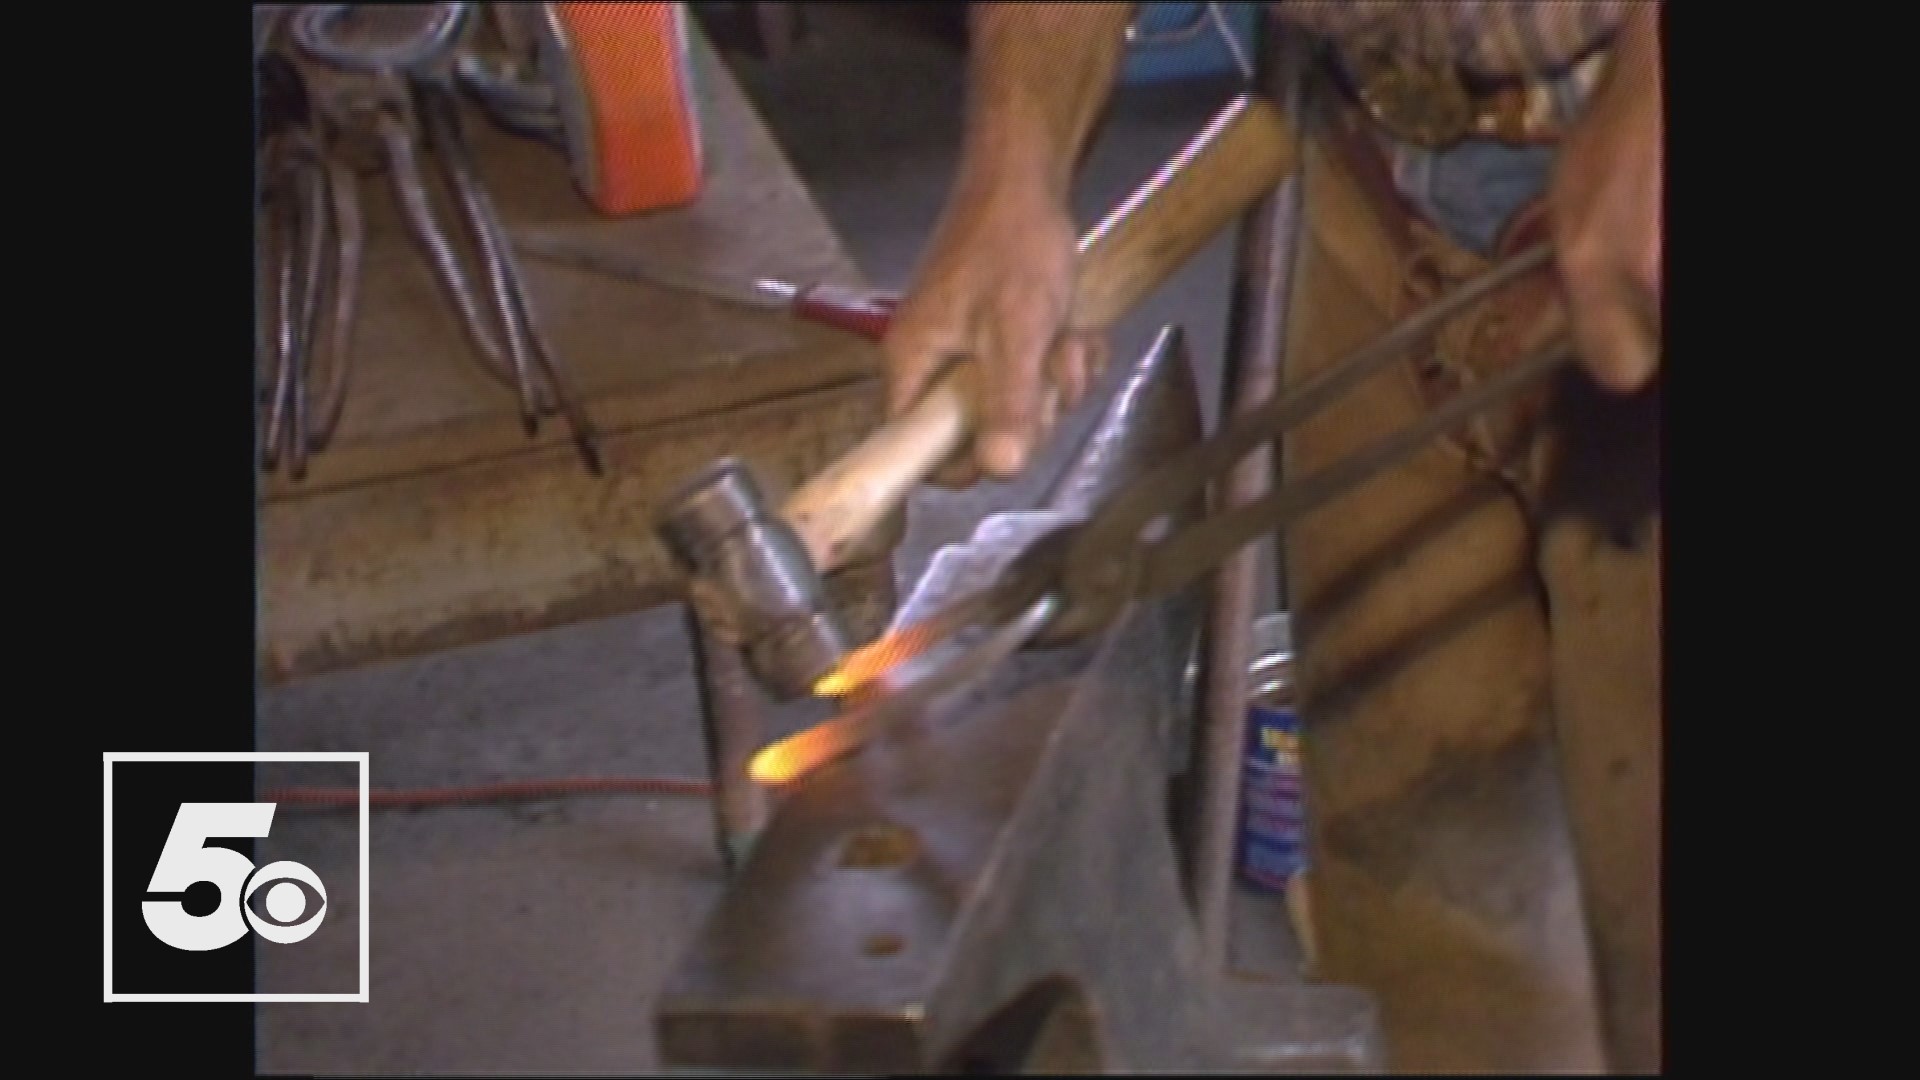 We're going back to 1986 to get a behind-the-scenes look at the art of blacksmithing.